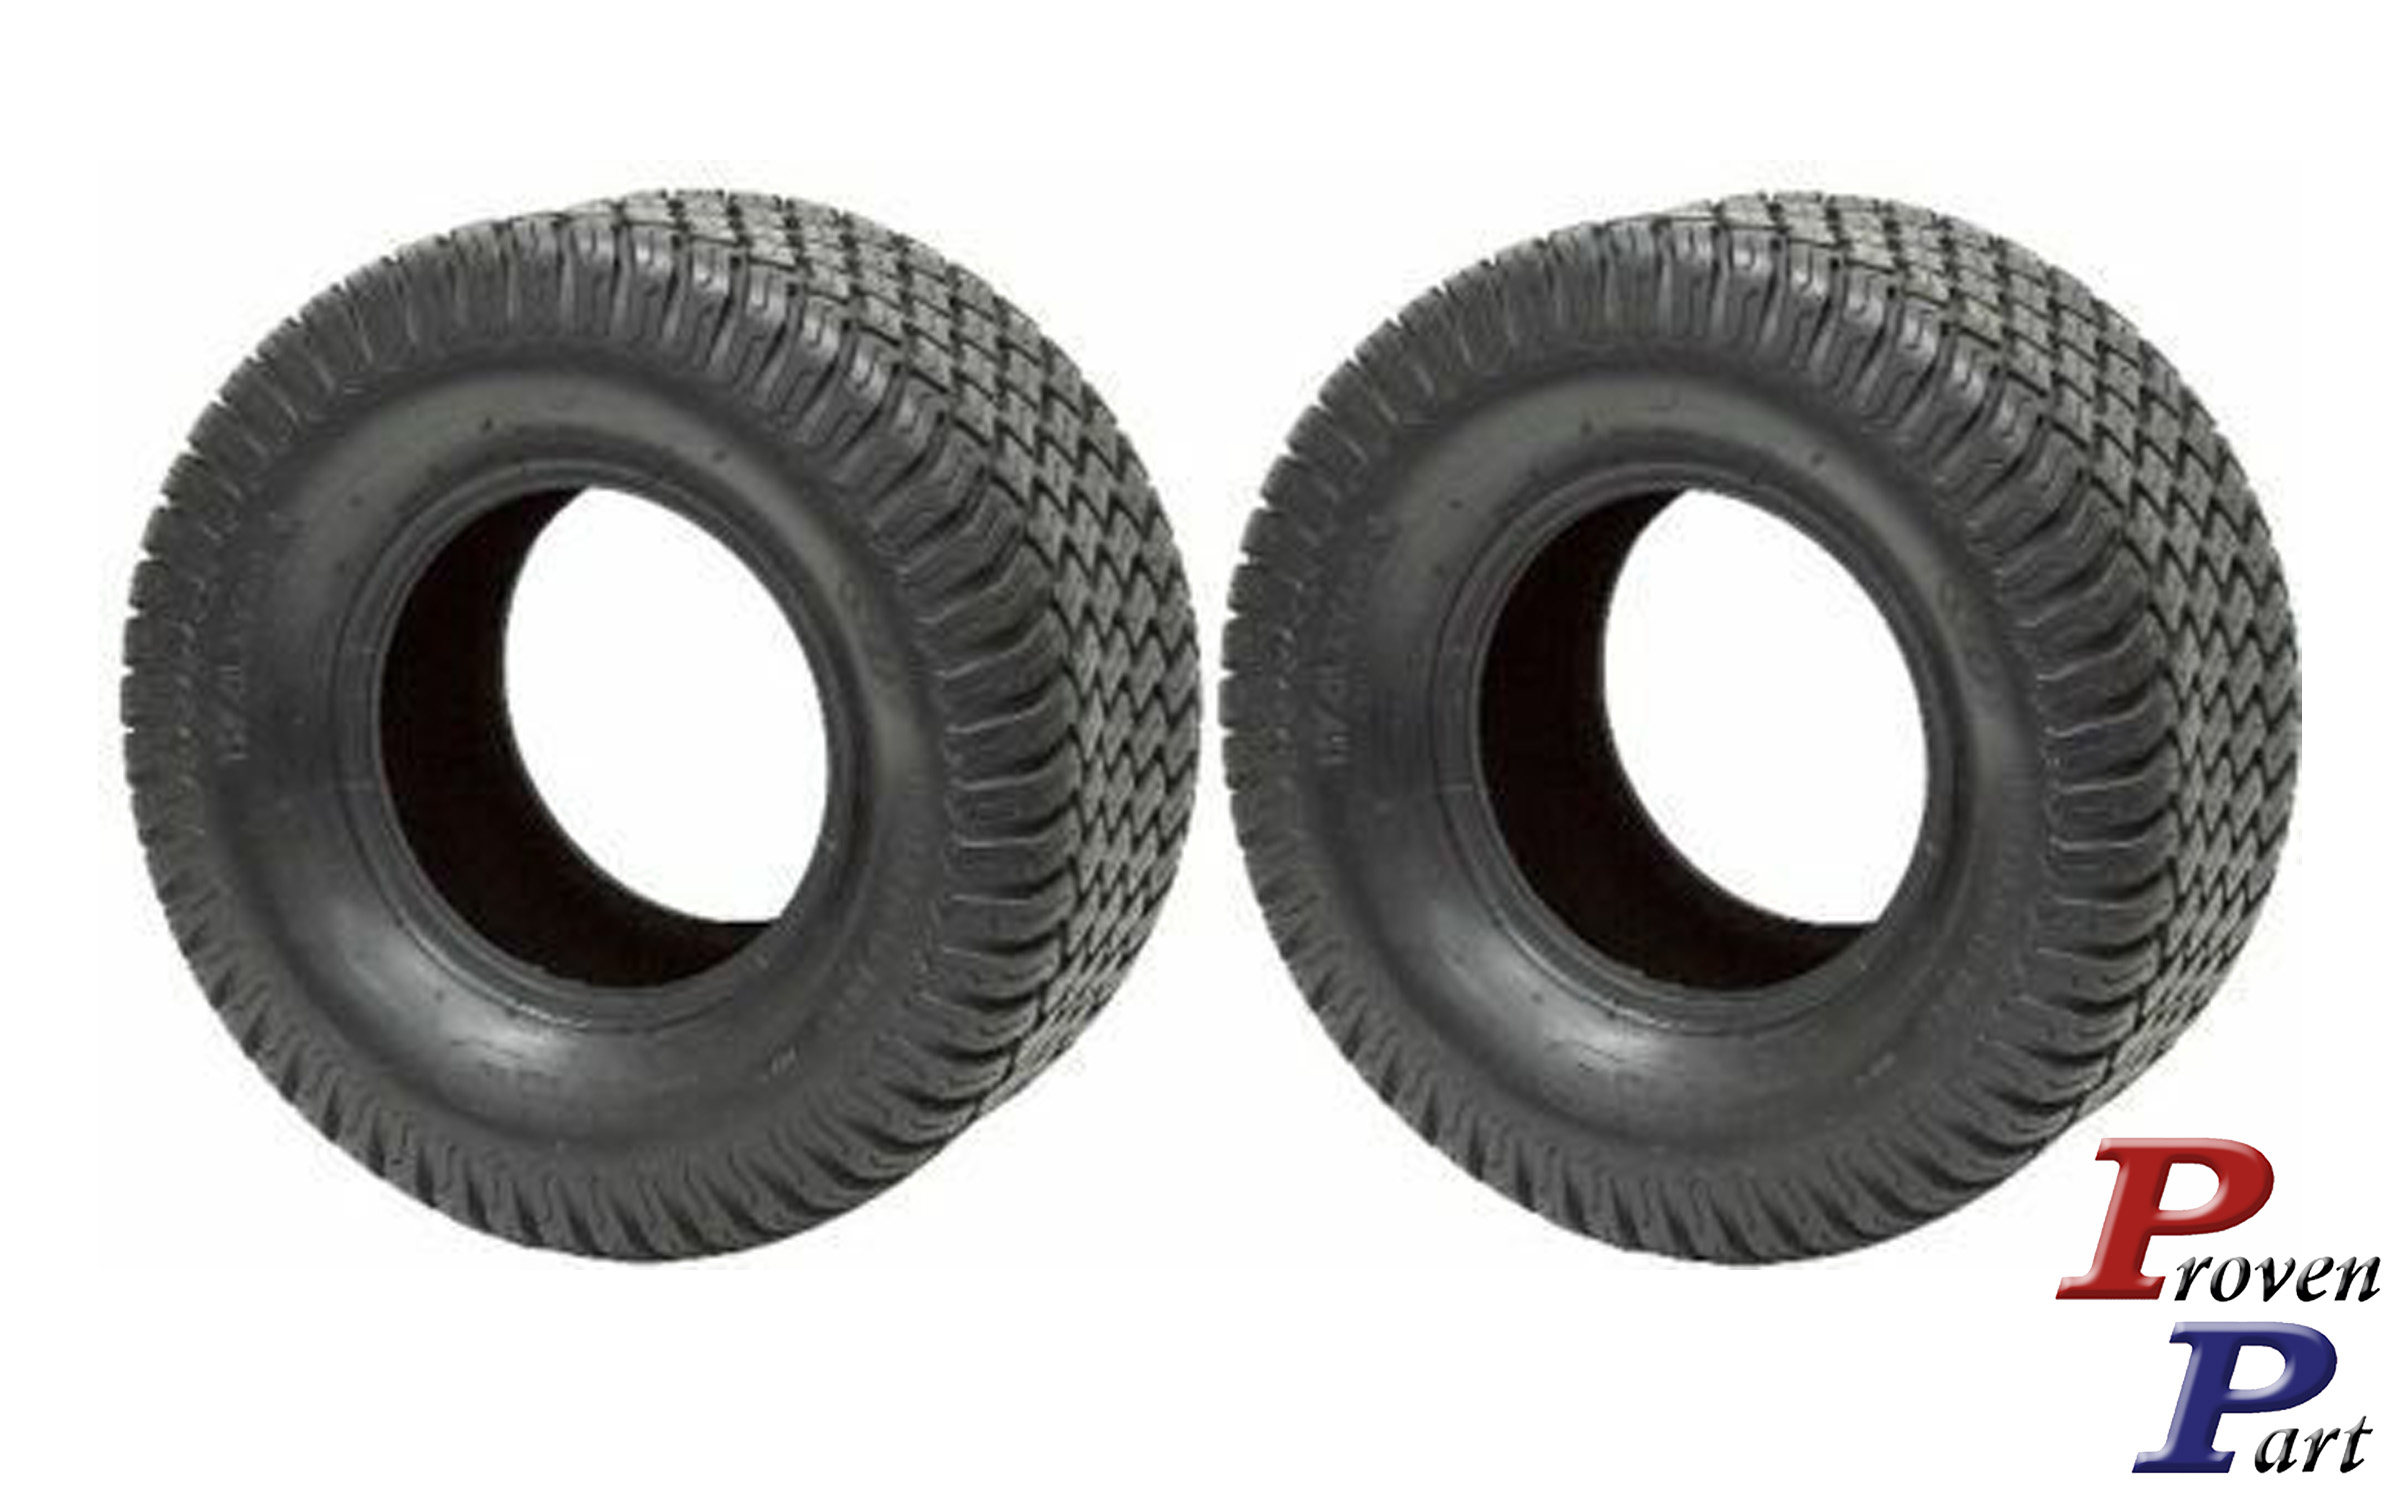 2 lawn mower tires ProMaster 20X8.00-8 replace GX22217 M123808